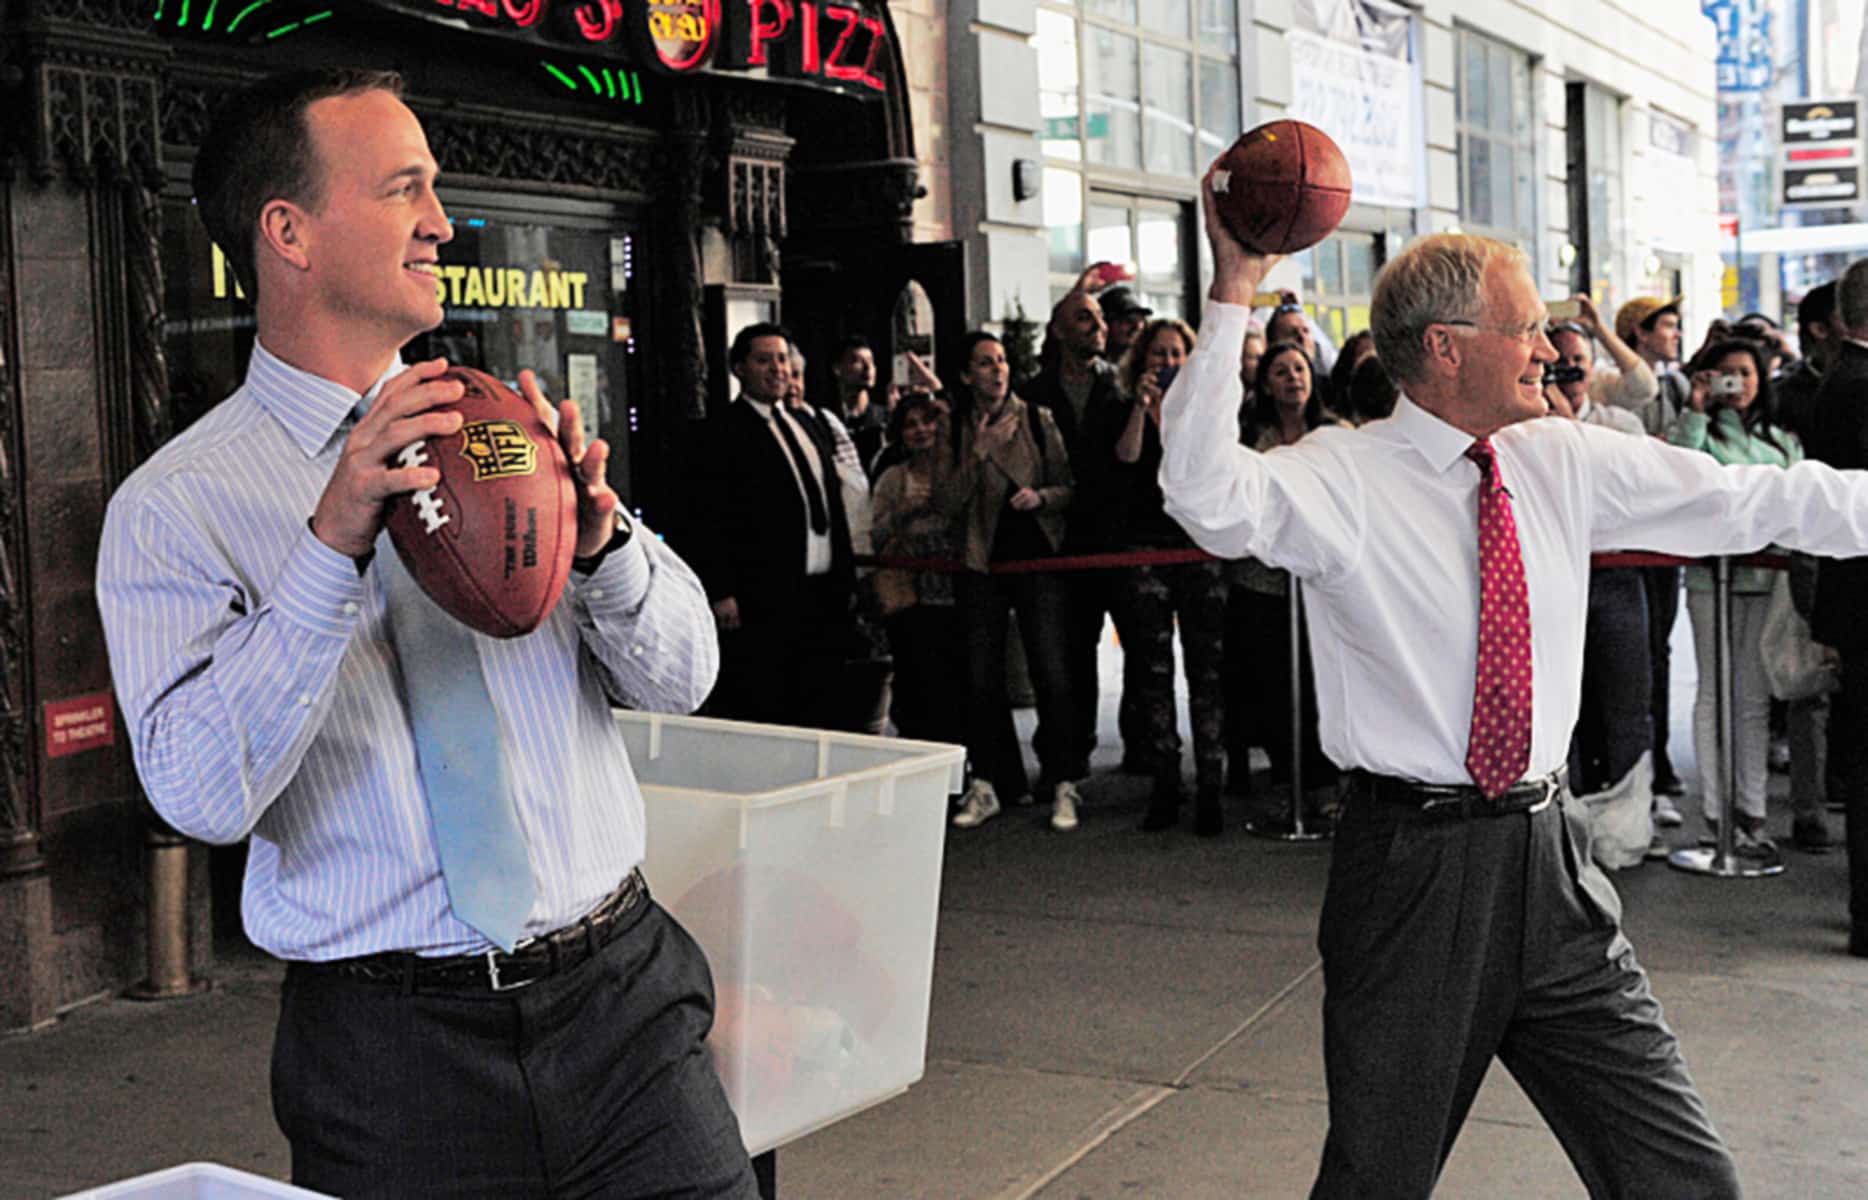 LATE SHOW WITH DAVID LETTERMAN, l-r: Peyton Manning, David Letterman